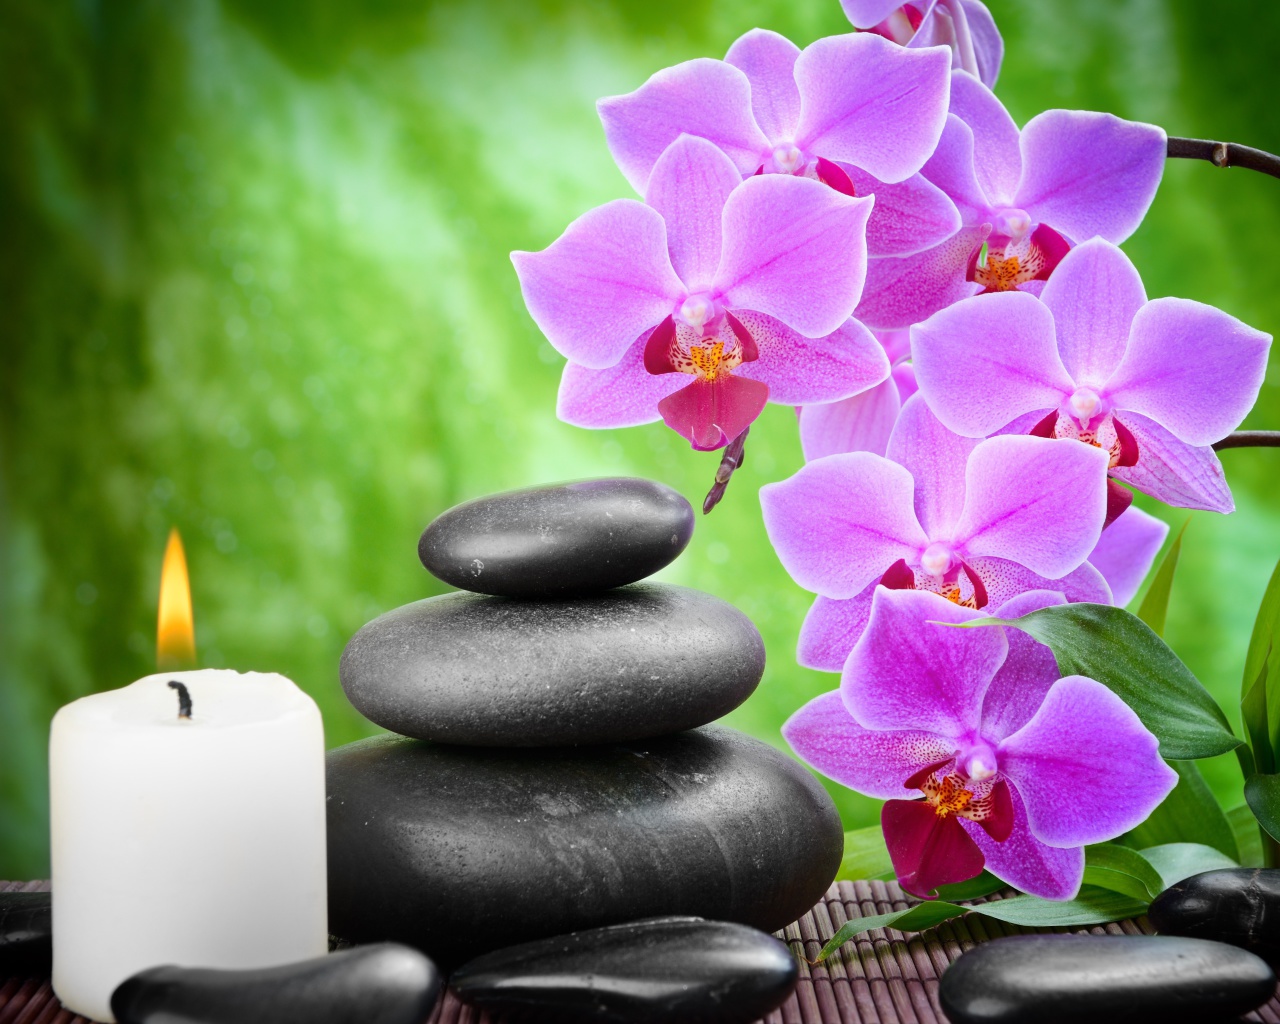 Pebbles, candles and orchids screenshot #1 1280x1024